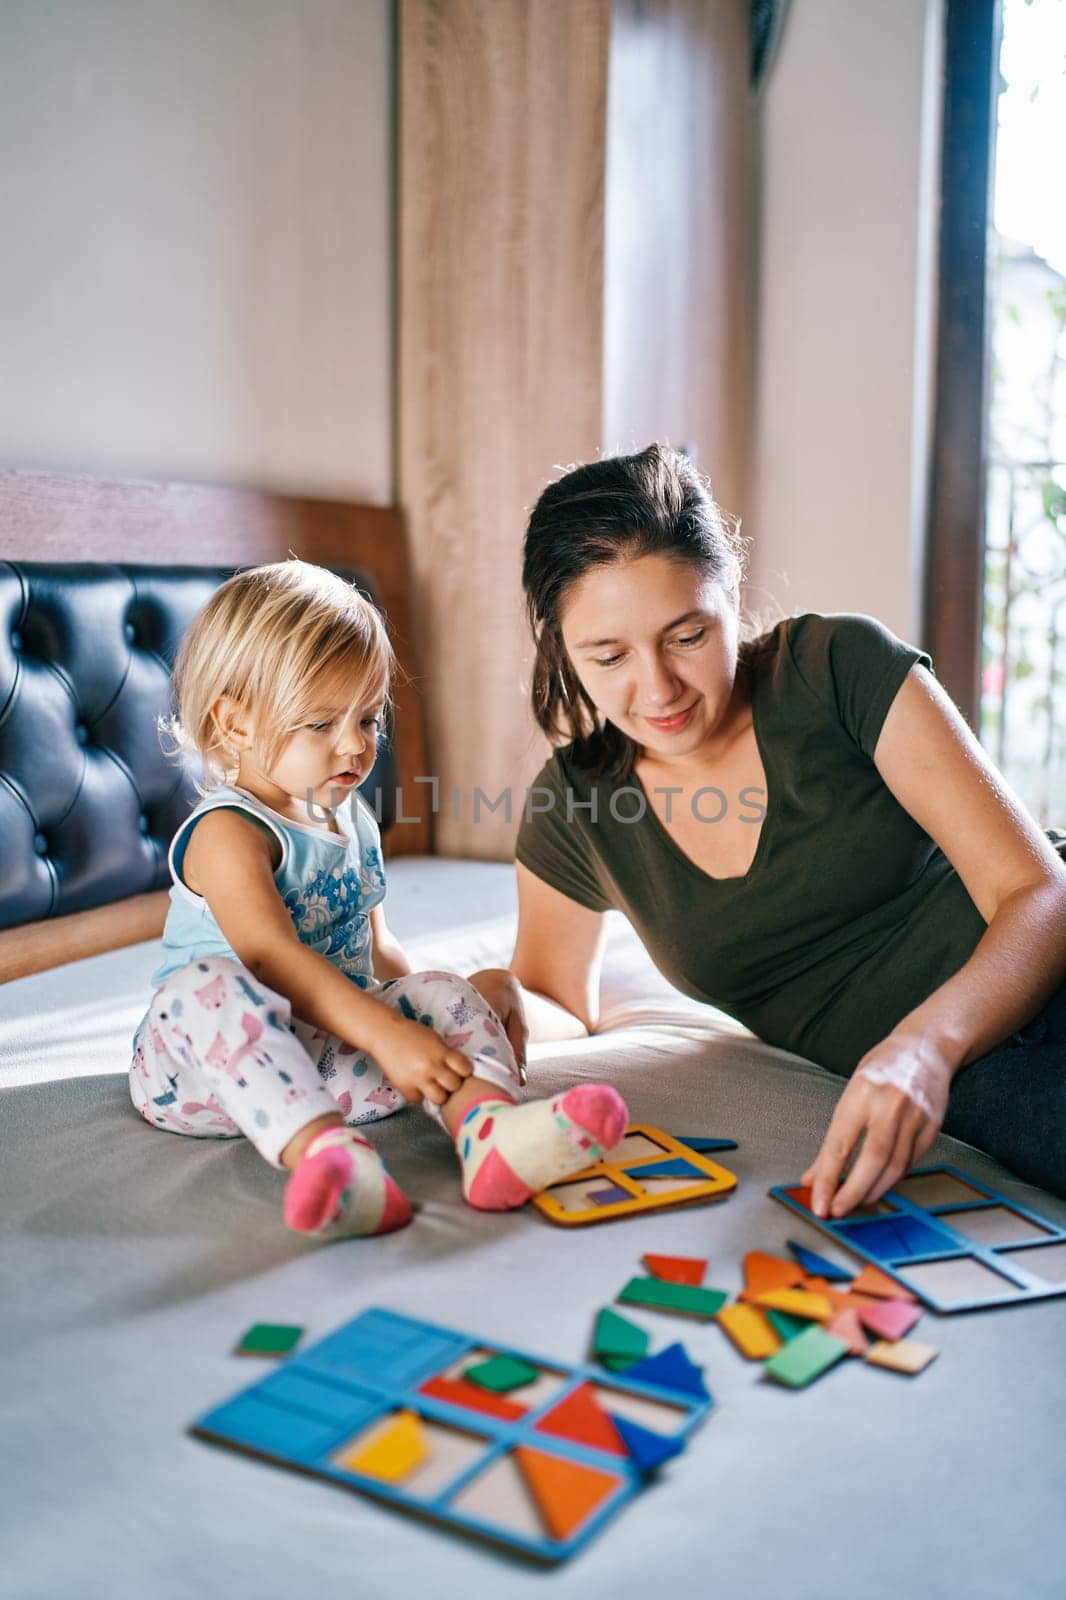 Little girl looks at her mother putting together a puzzle on the bed. High quality photo